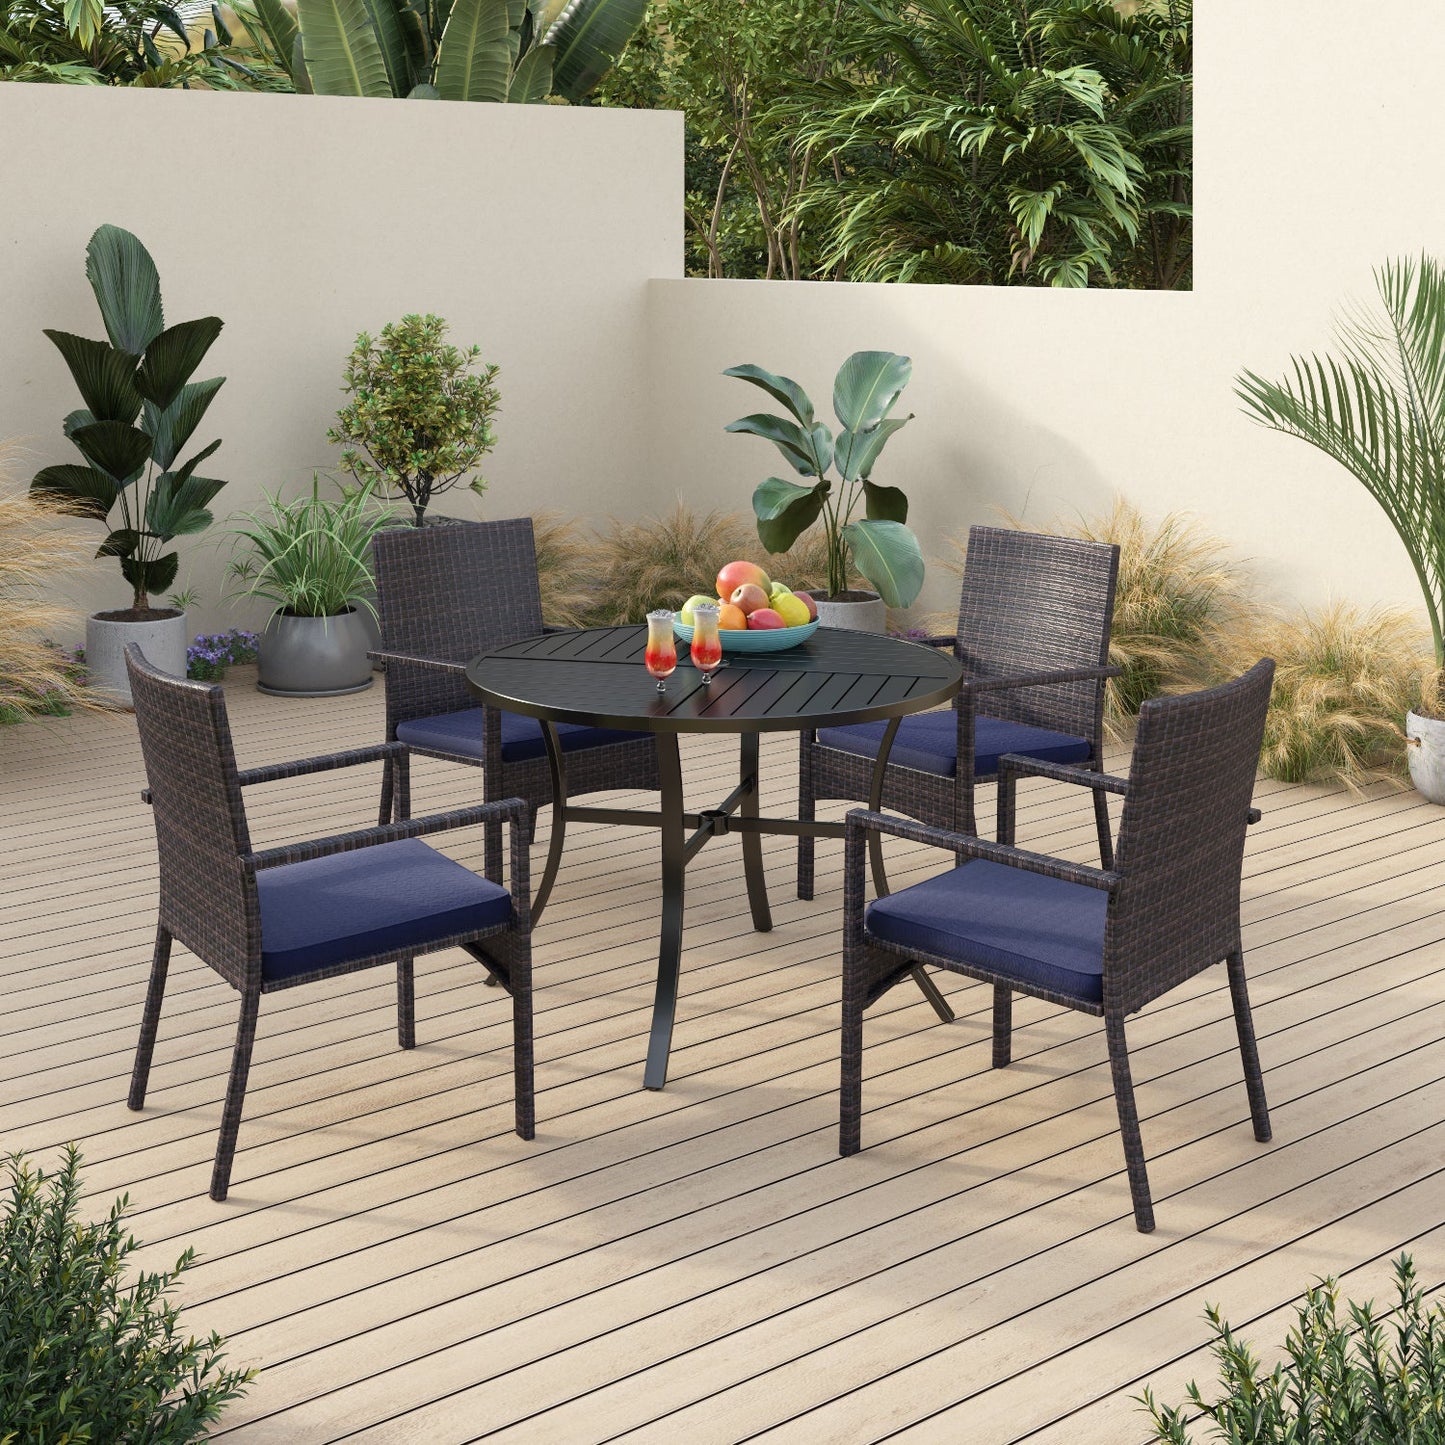 Sophia & William 5 Pieces Outdoor Patio Dining Set 4 Brown PE Rattan Chairs and Metal Round Dining Table